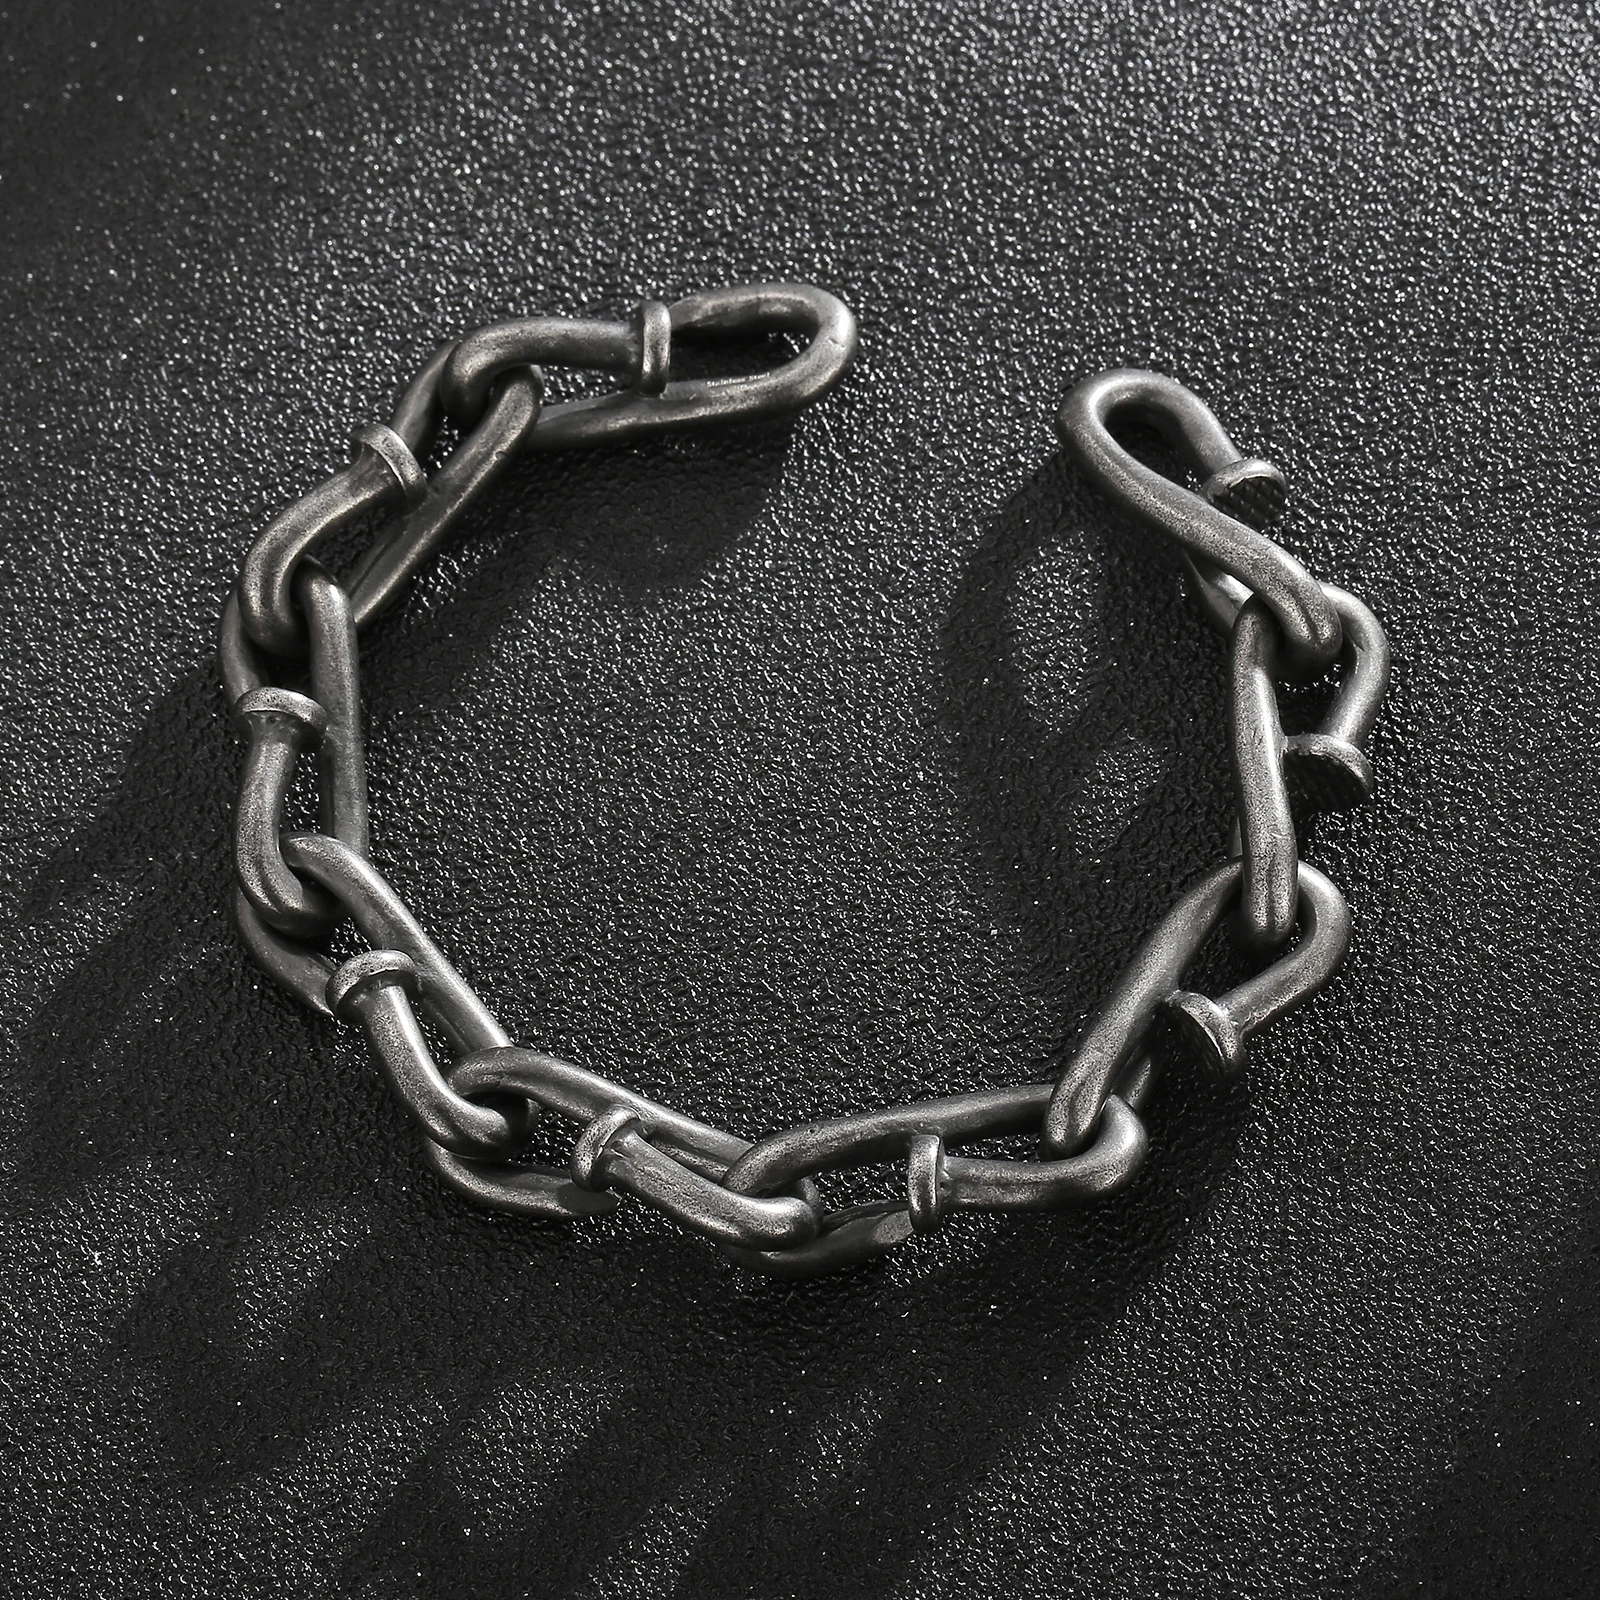 

HaoYi Vintage Stainless Steel Nails Chain Bracelet For Men Fashion Oxidized Black Punk Cuff Jewelry Gift